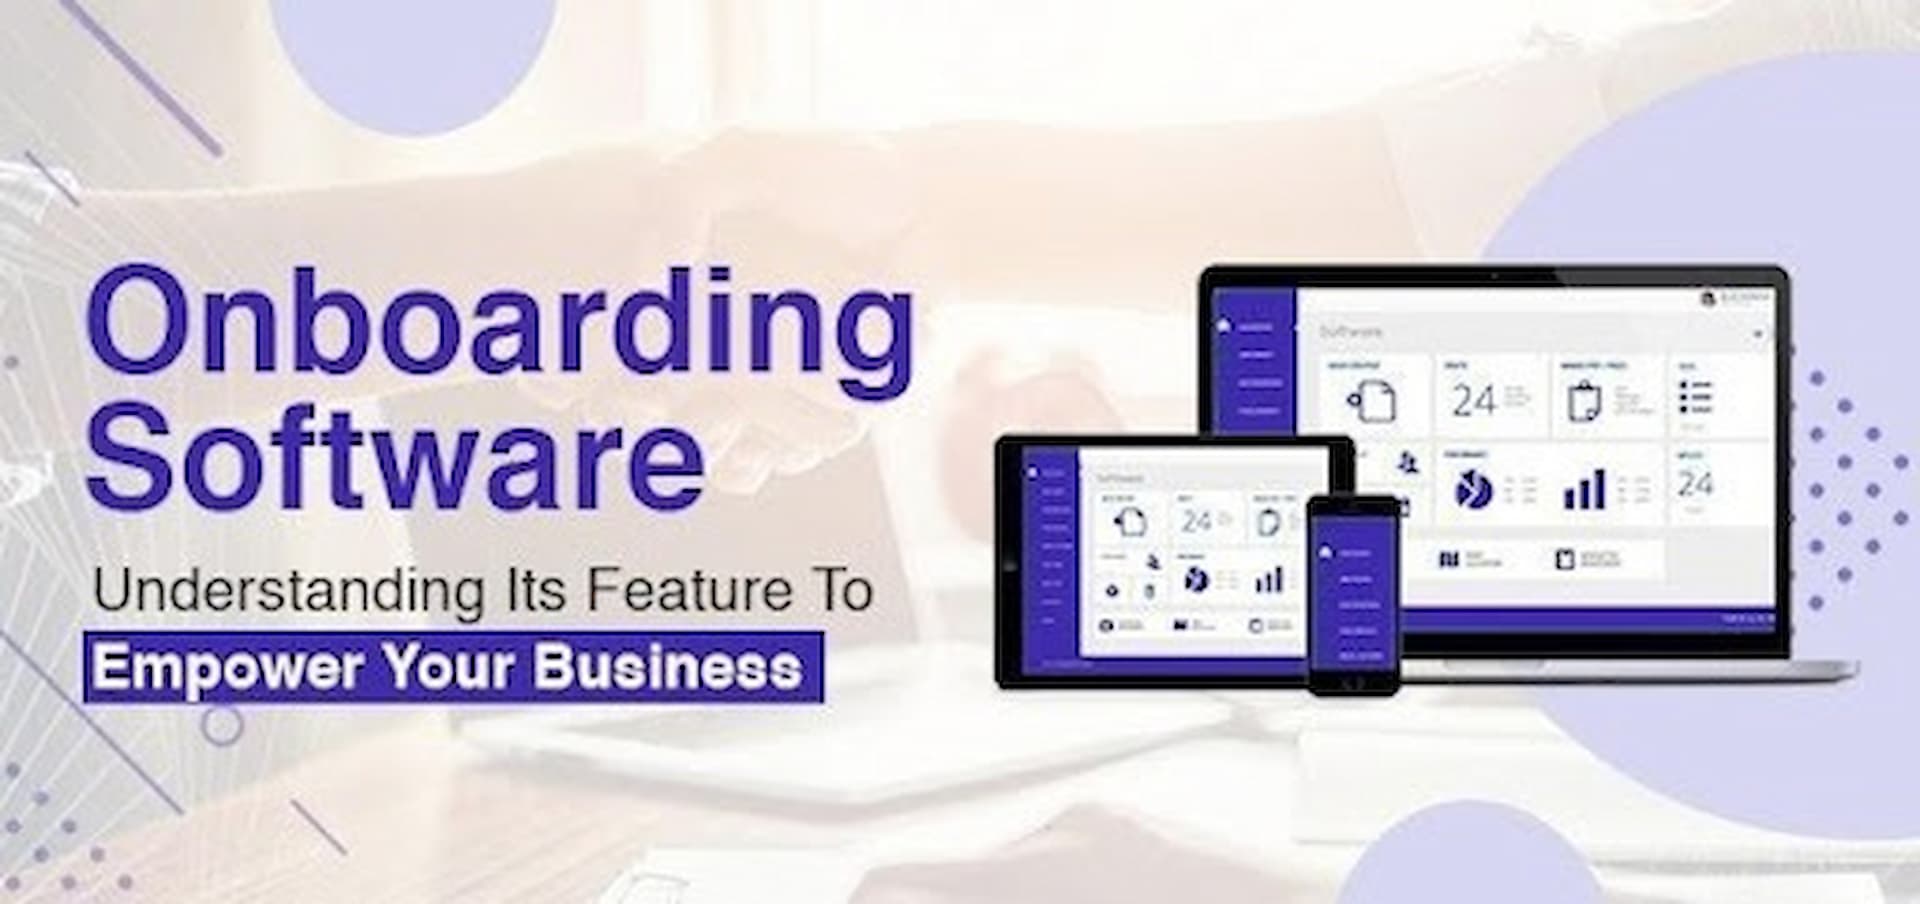 Onboarding Software: Understanding Its Feature To Empower Your Business